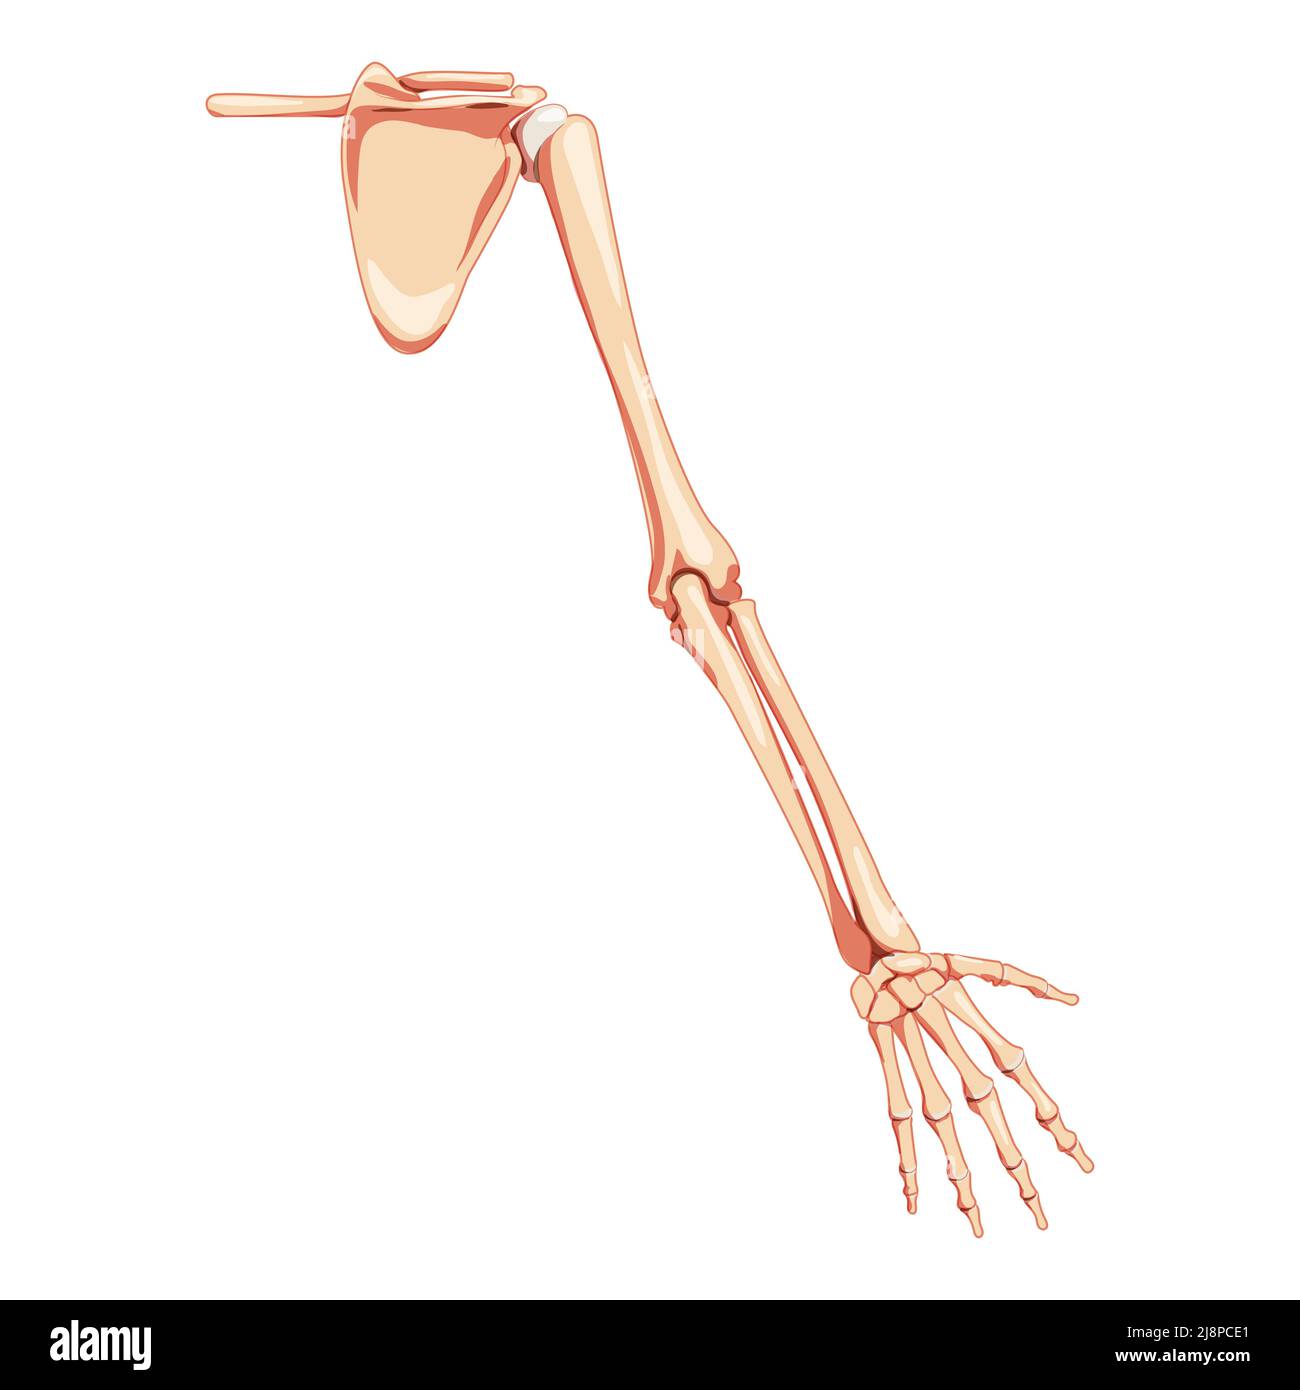 Upper limb Arm with Shoulder girdle Skeleton Human back view. Set of Anatomically correct realistic flat natural color concept Vector illustration of anatomy isolated on white background Stock Vector